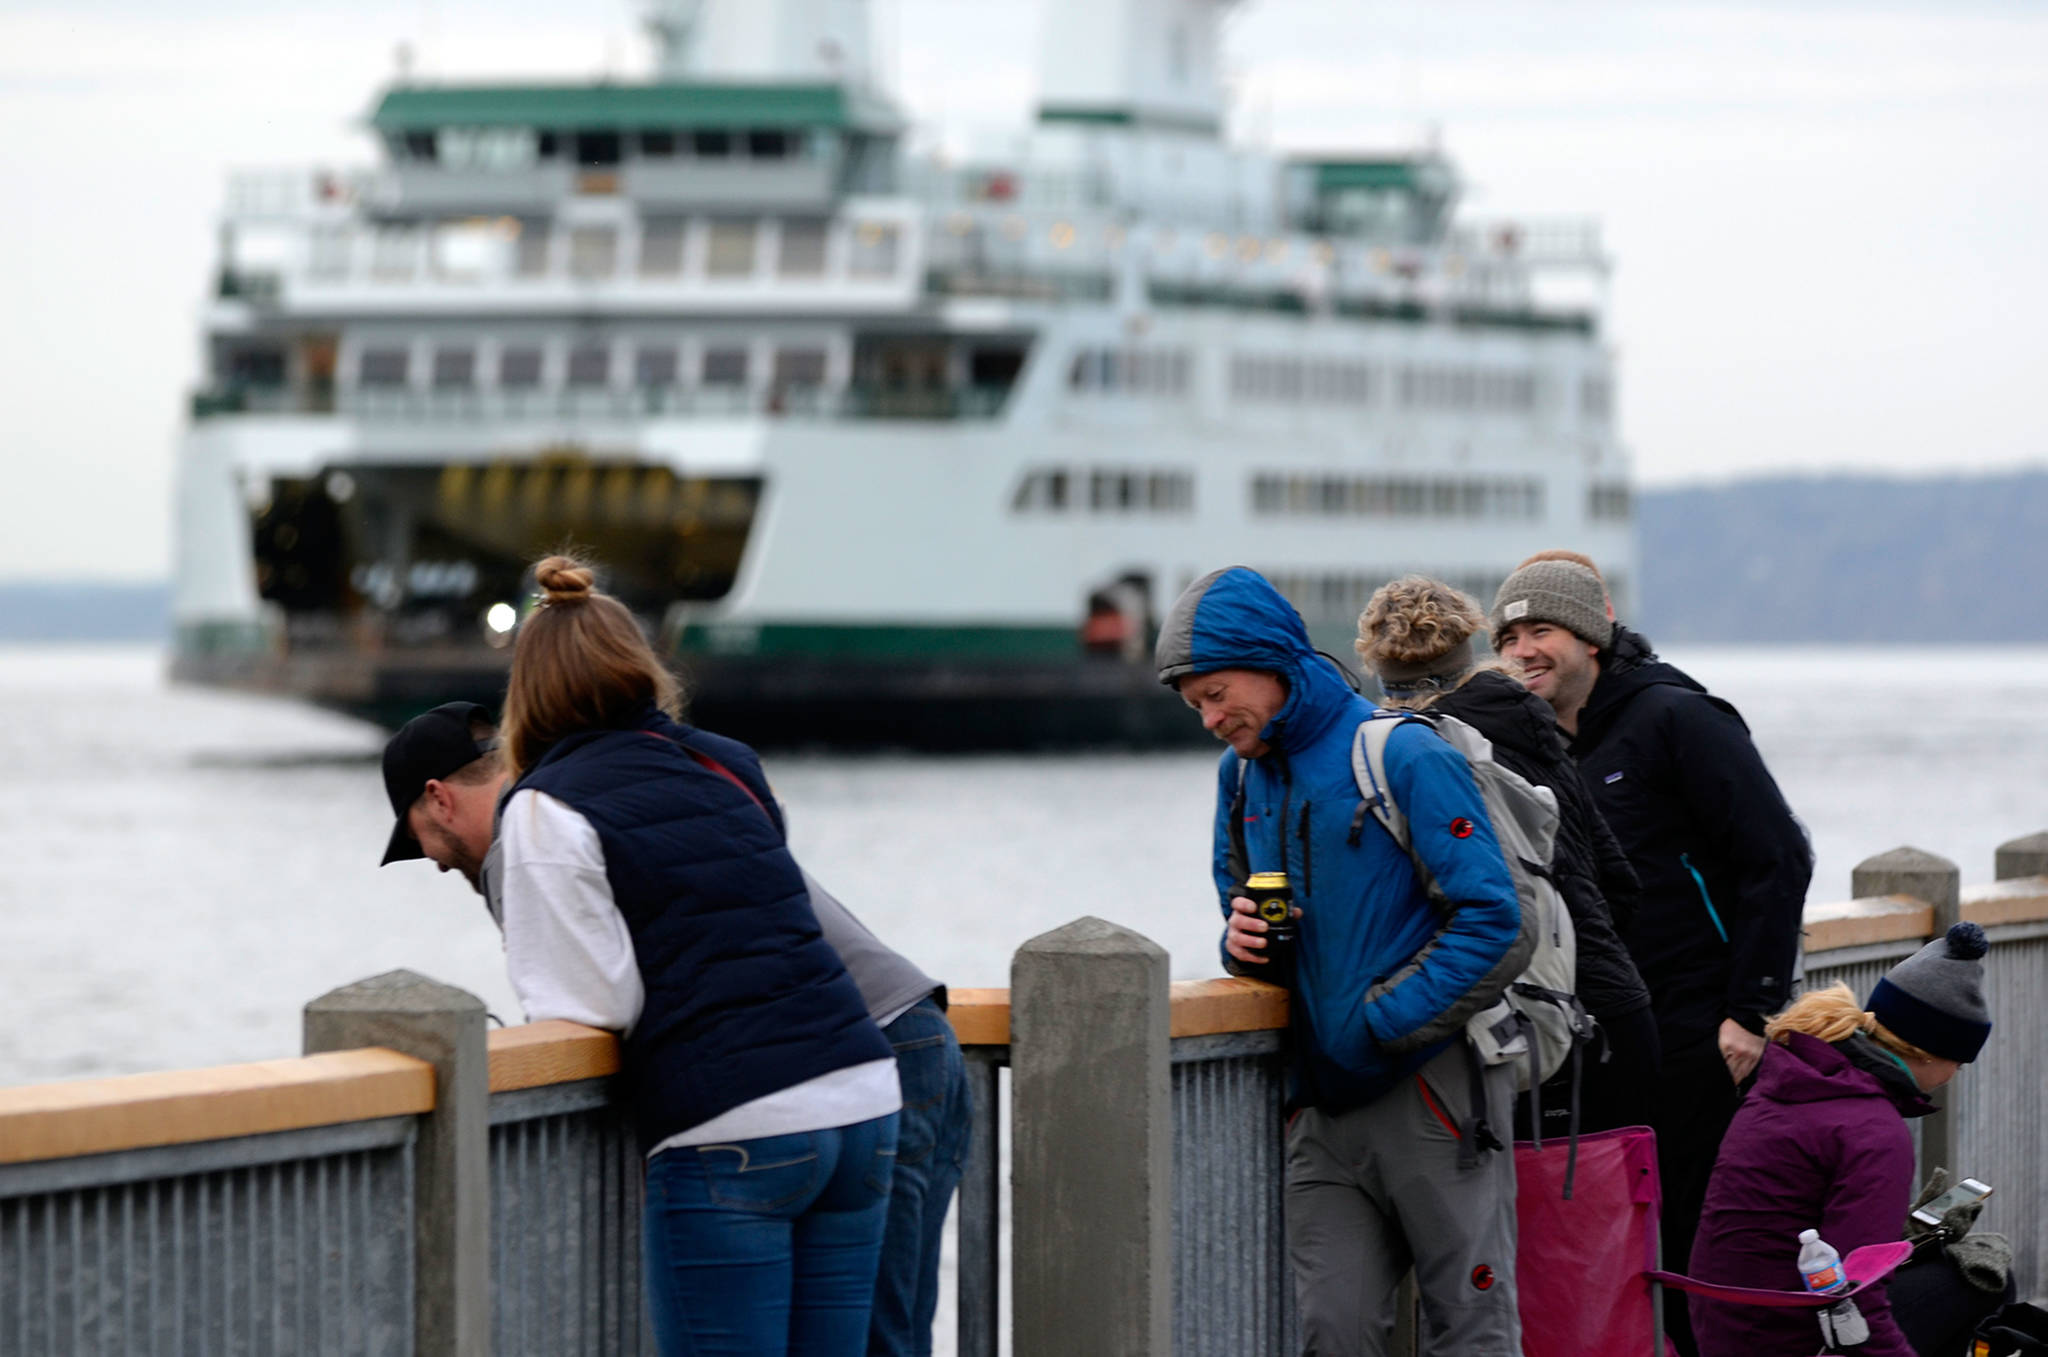 State adds sailings on Clinton route for busy Fourth of July weekend